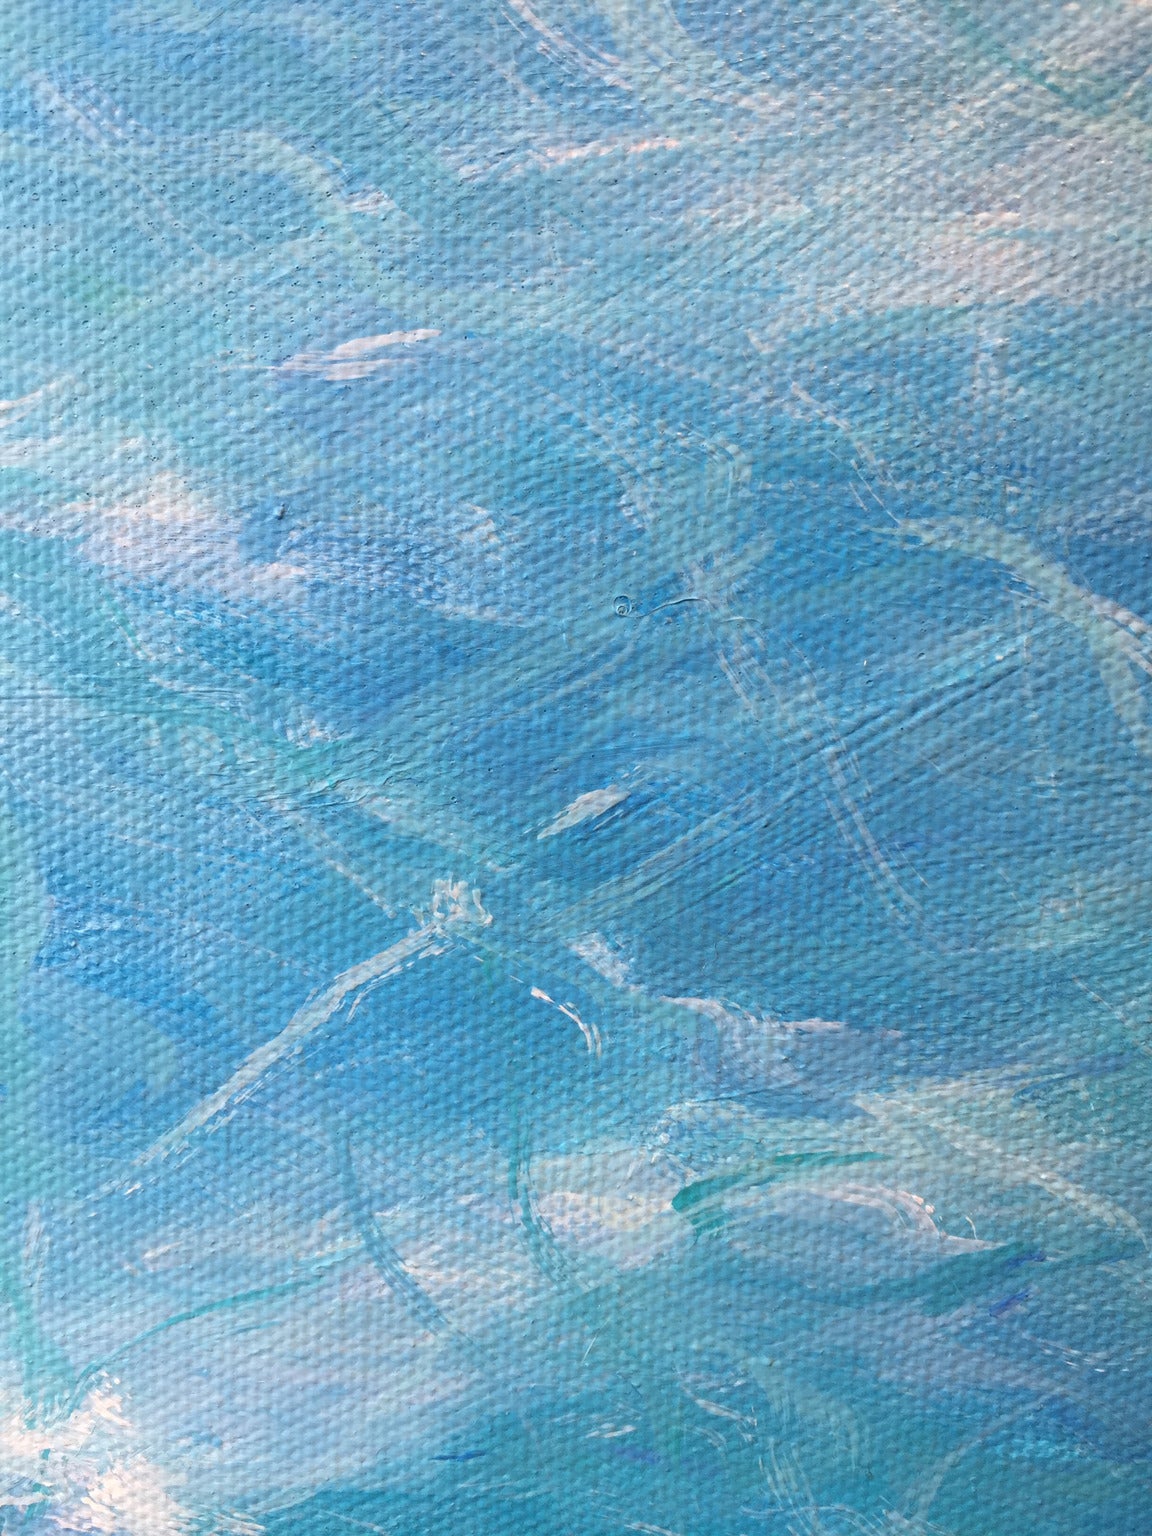 Pool Water I - Painting by Megan Ruch